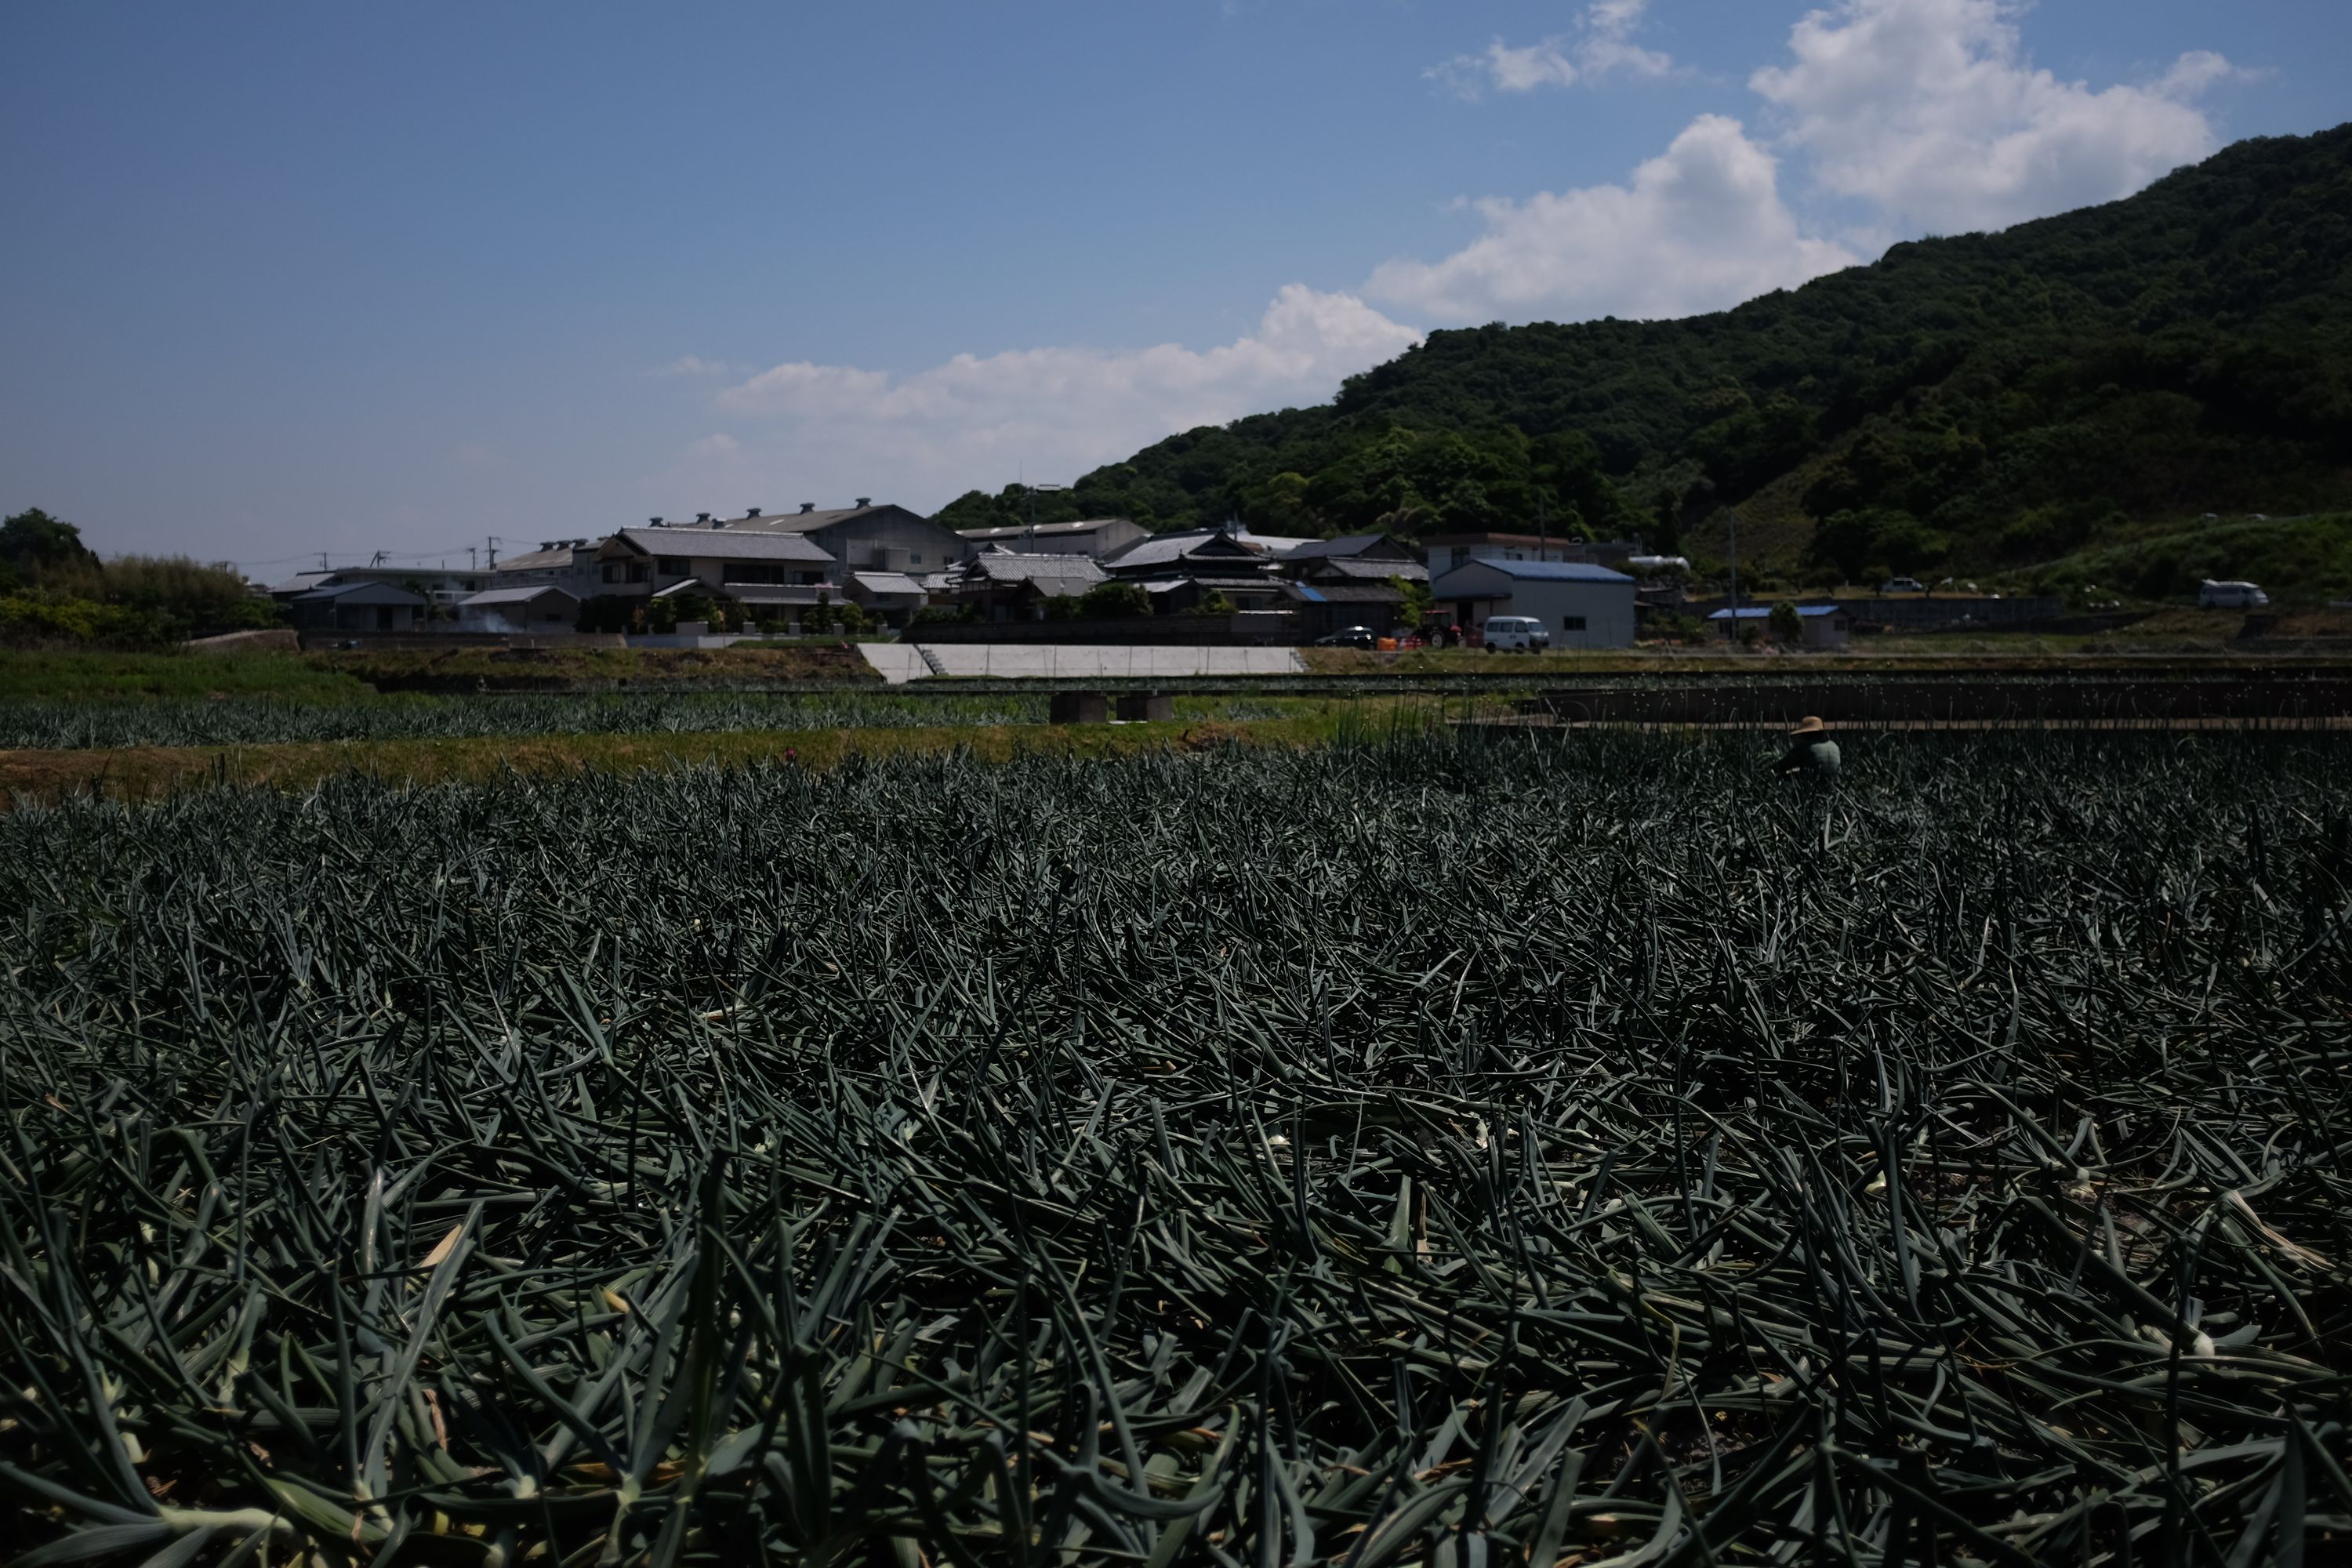 A field a dark green spring onions with a Japanese village in the distance.